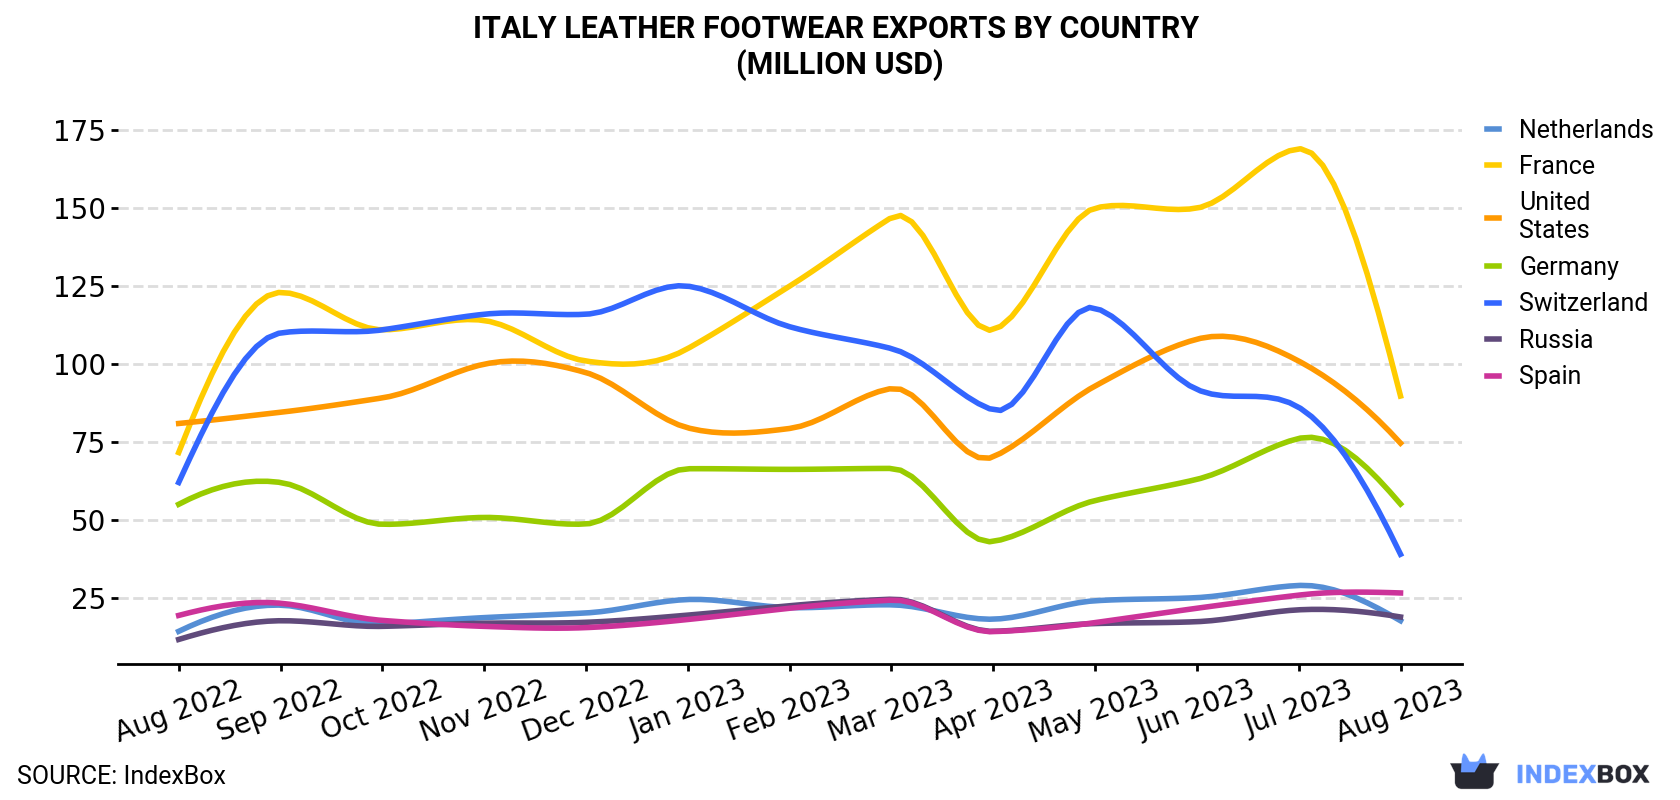 Italy Leather Footwear Exports By Country (Million USD)